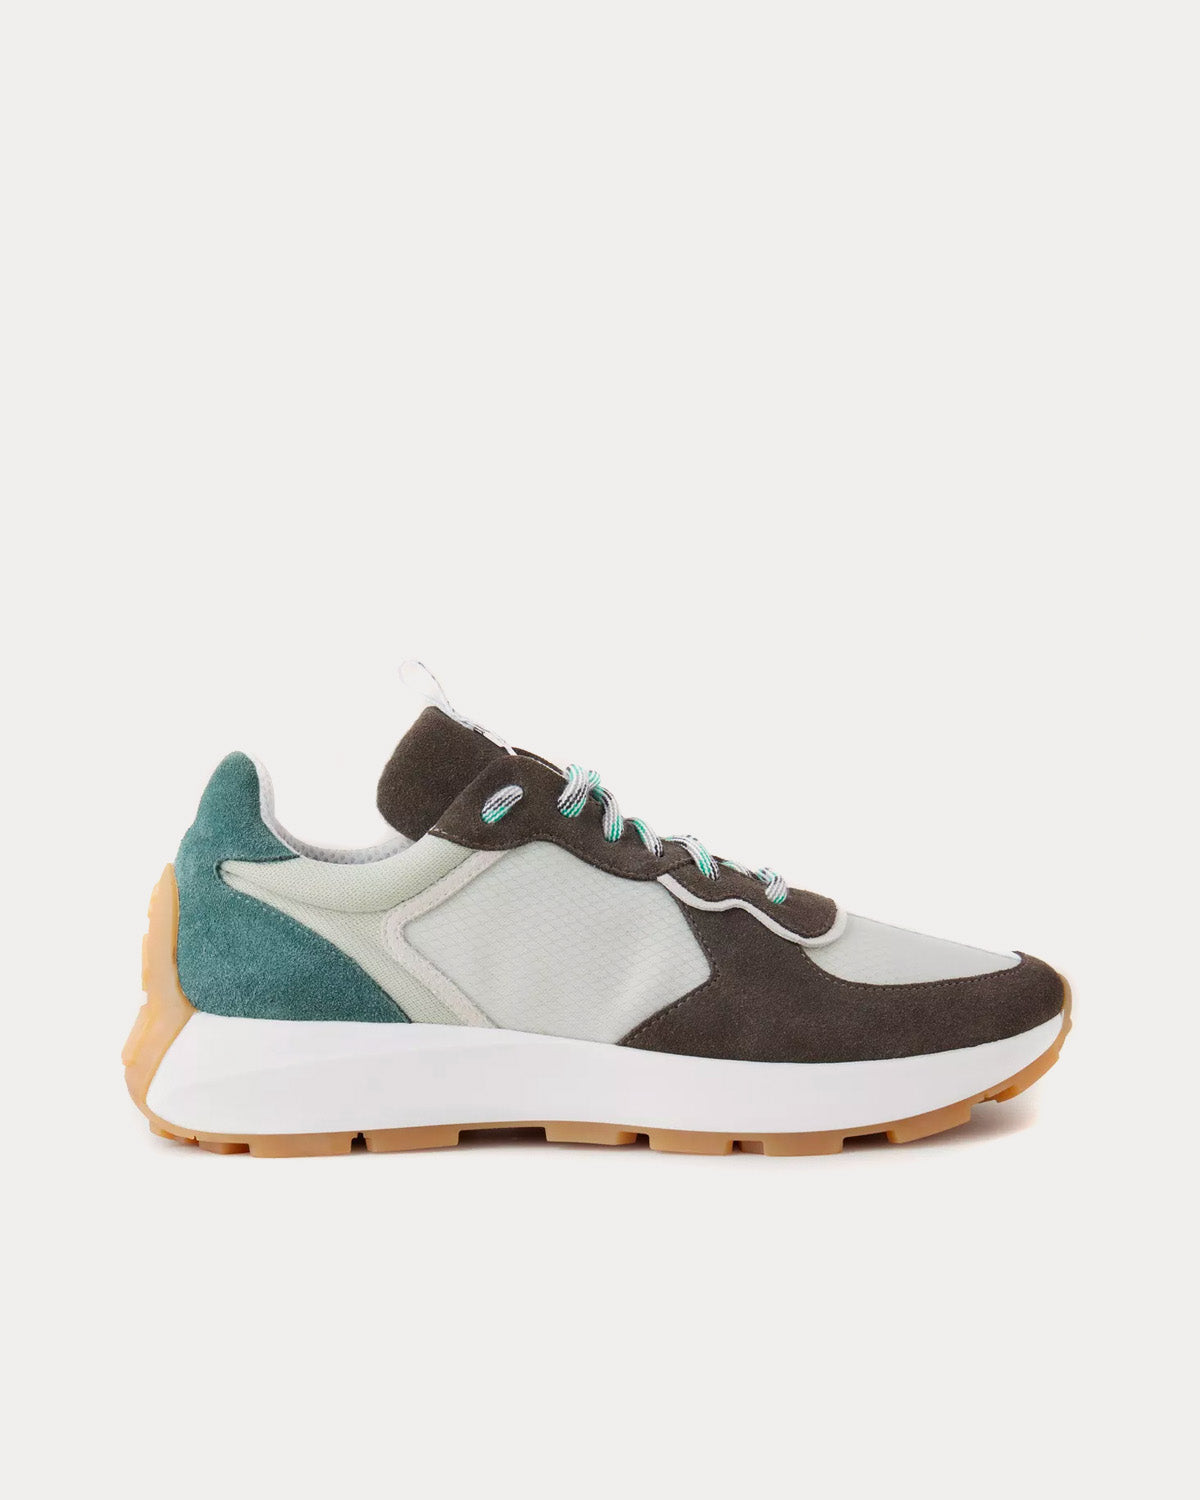 Mulberry - Runner Mixed Material Acrylic Green / Midnight / Maple Low Top Sneakers